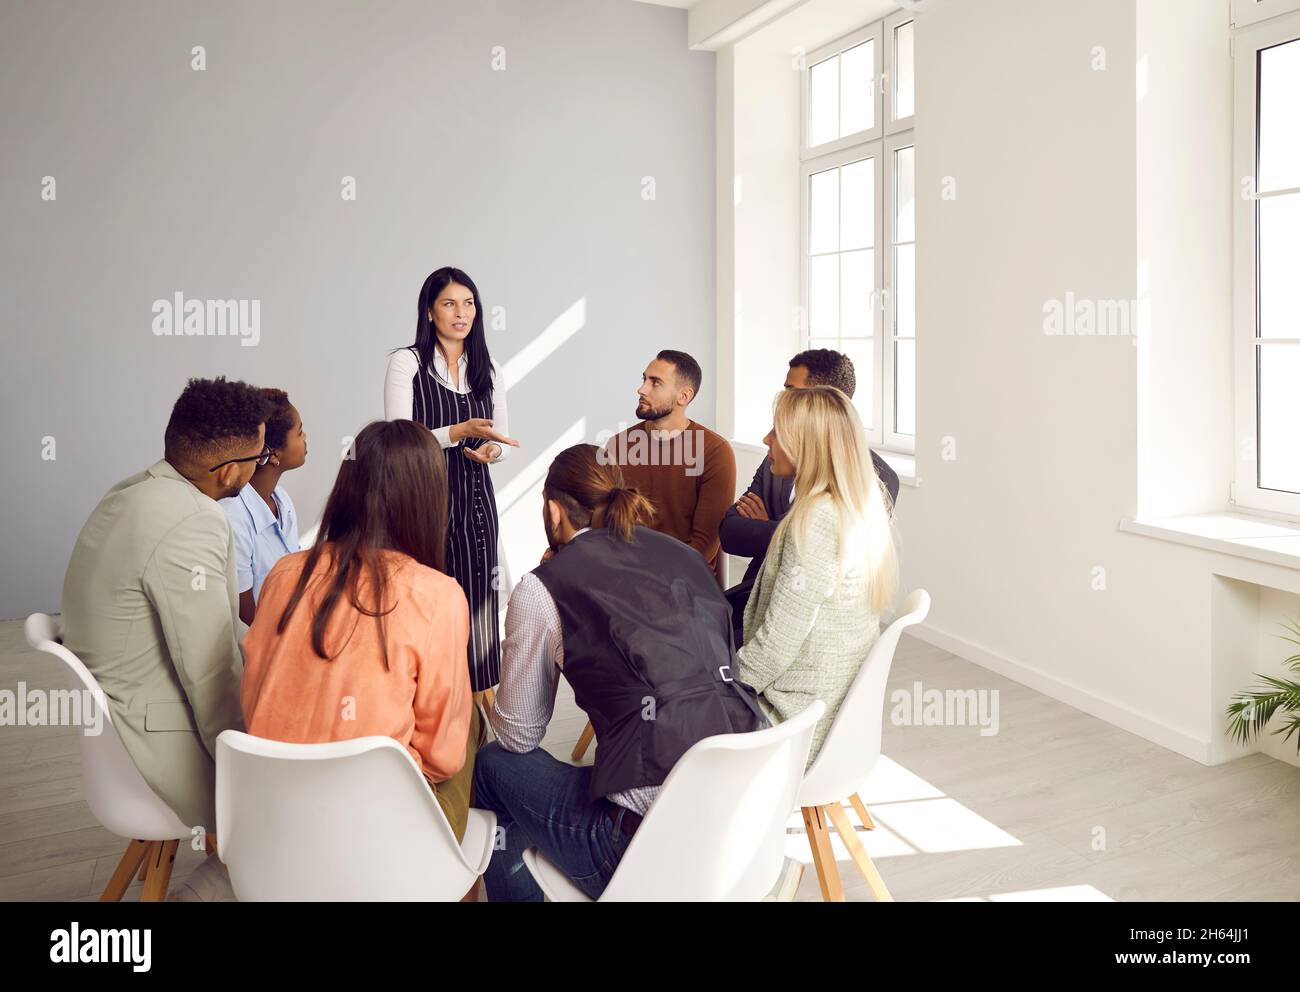 Woman speaks at group therapy or psychotherapy meeting providing psychological help to people. Stock Photo